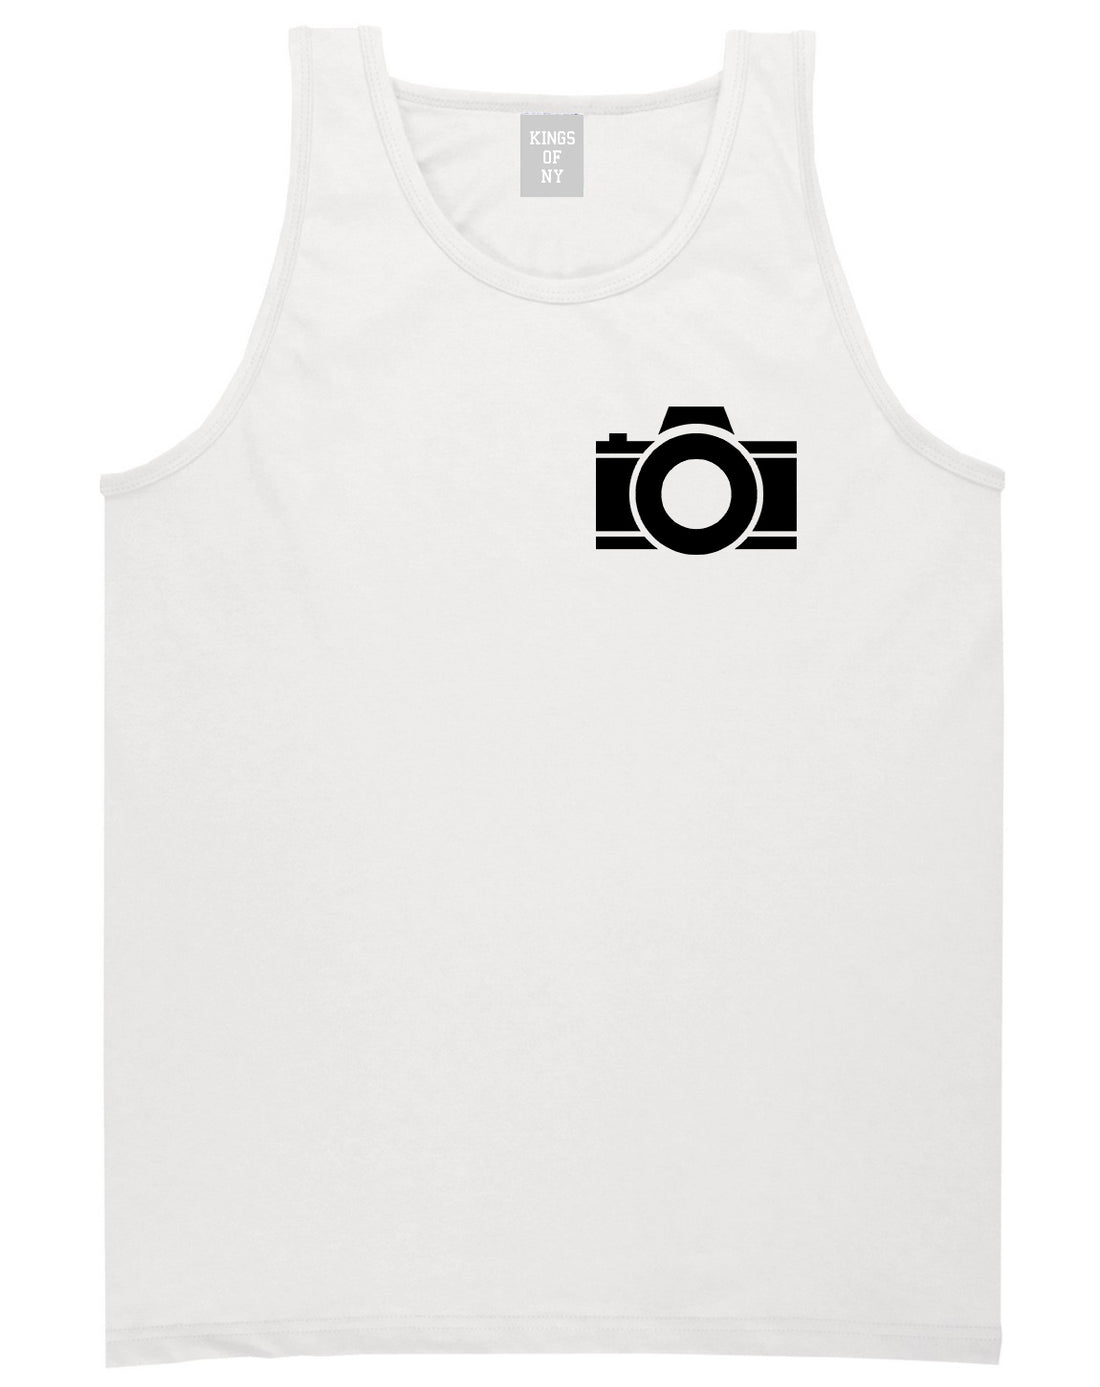 Camera Photographer Chest White Tank Top Shirt by Kings Of NY